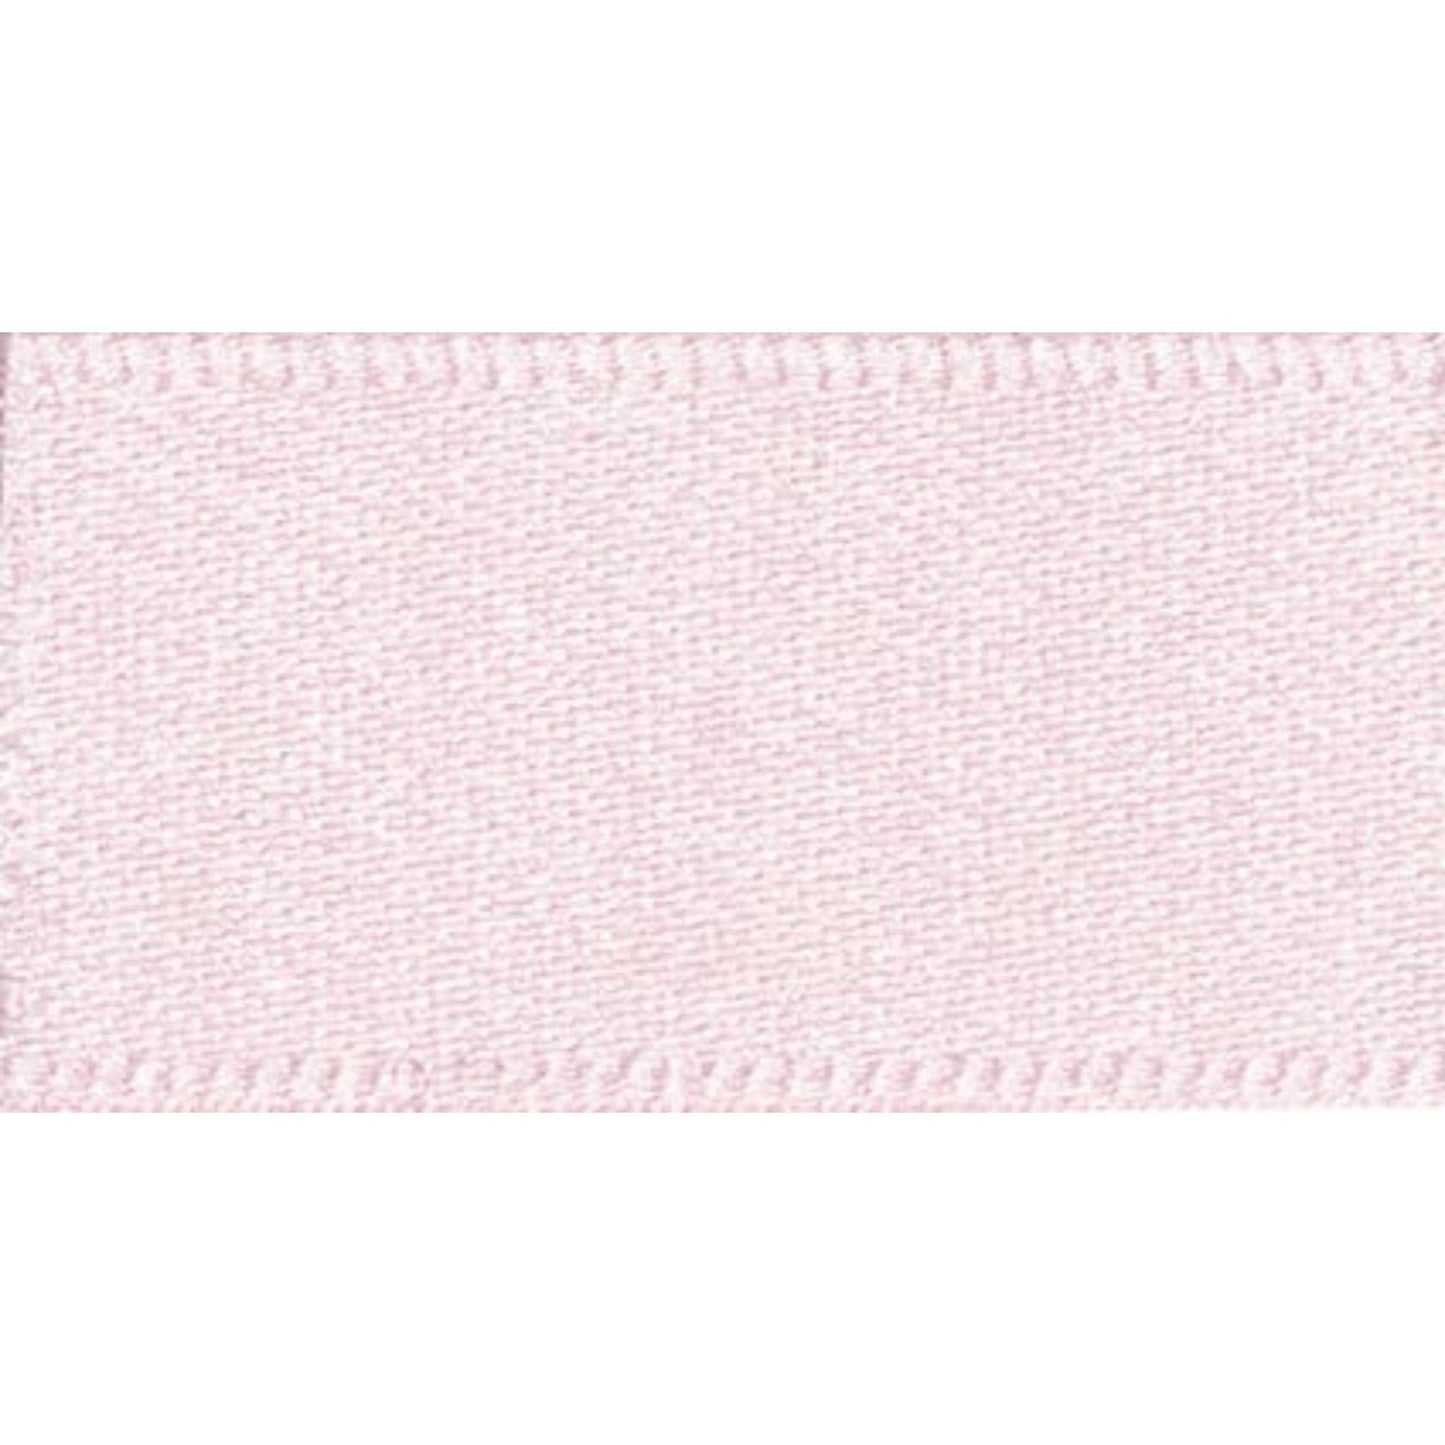 Double Faced Satin Ribbon Pale Pink: 35mm wide. Price per metre.